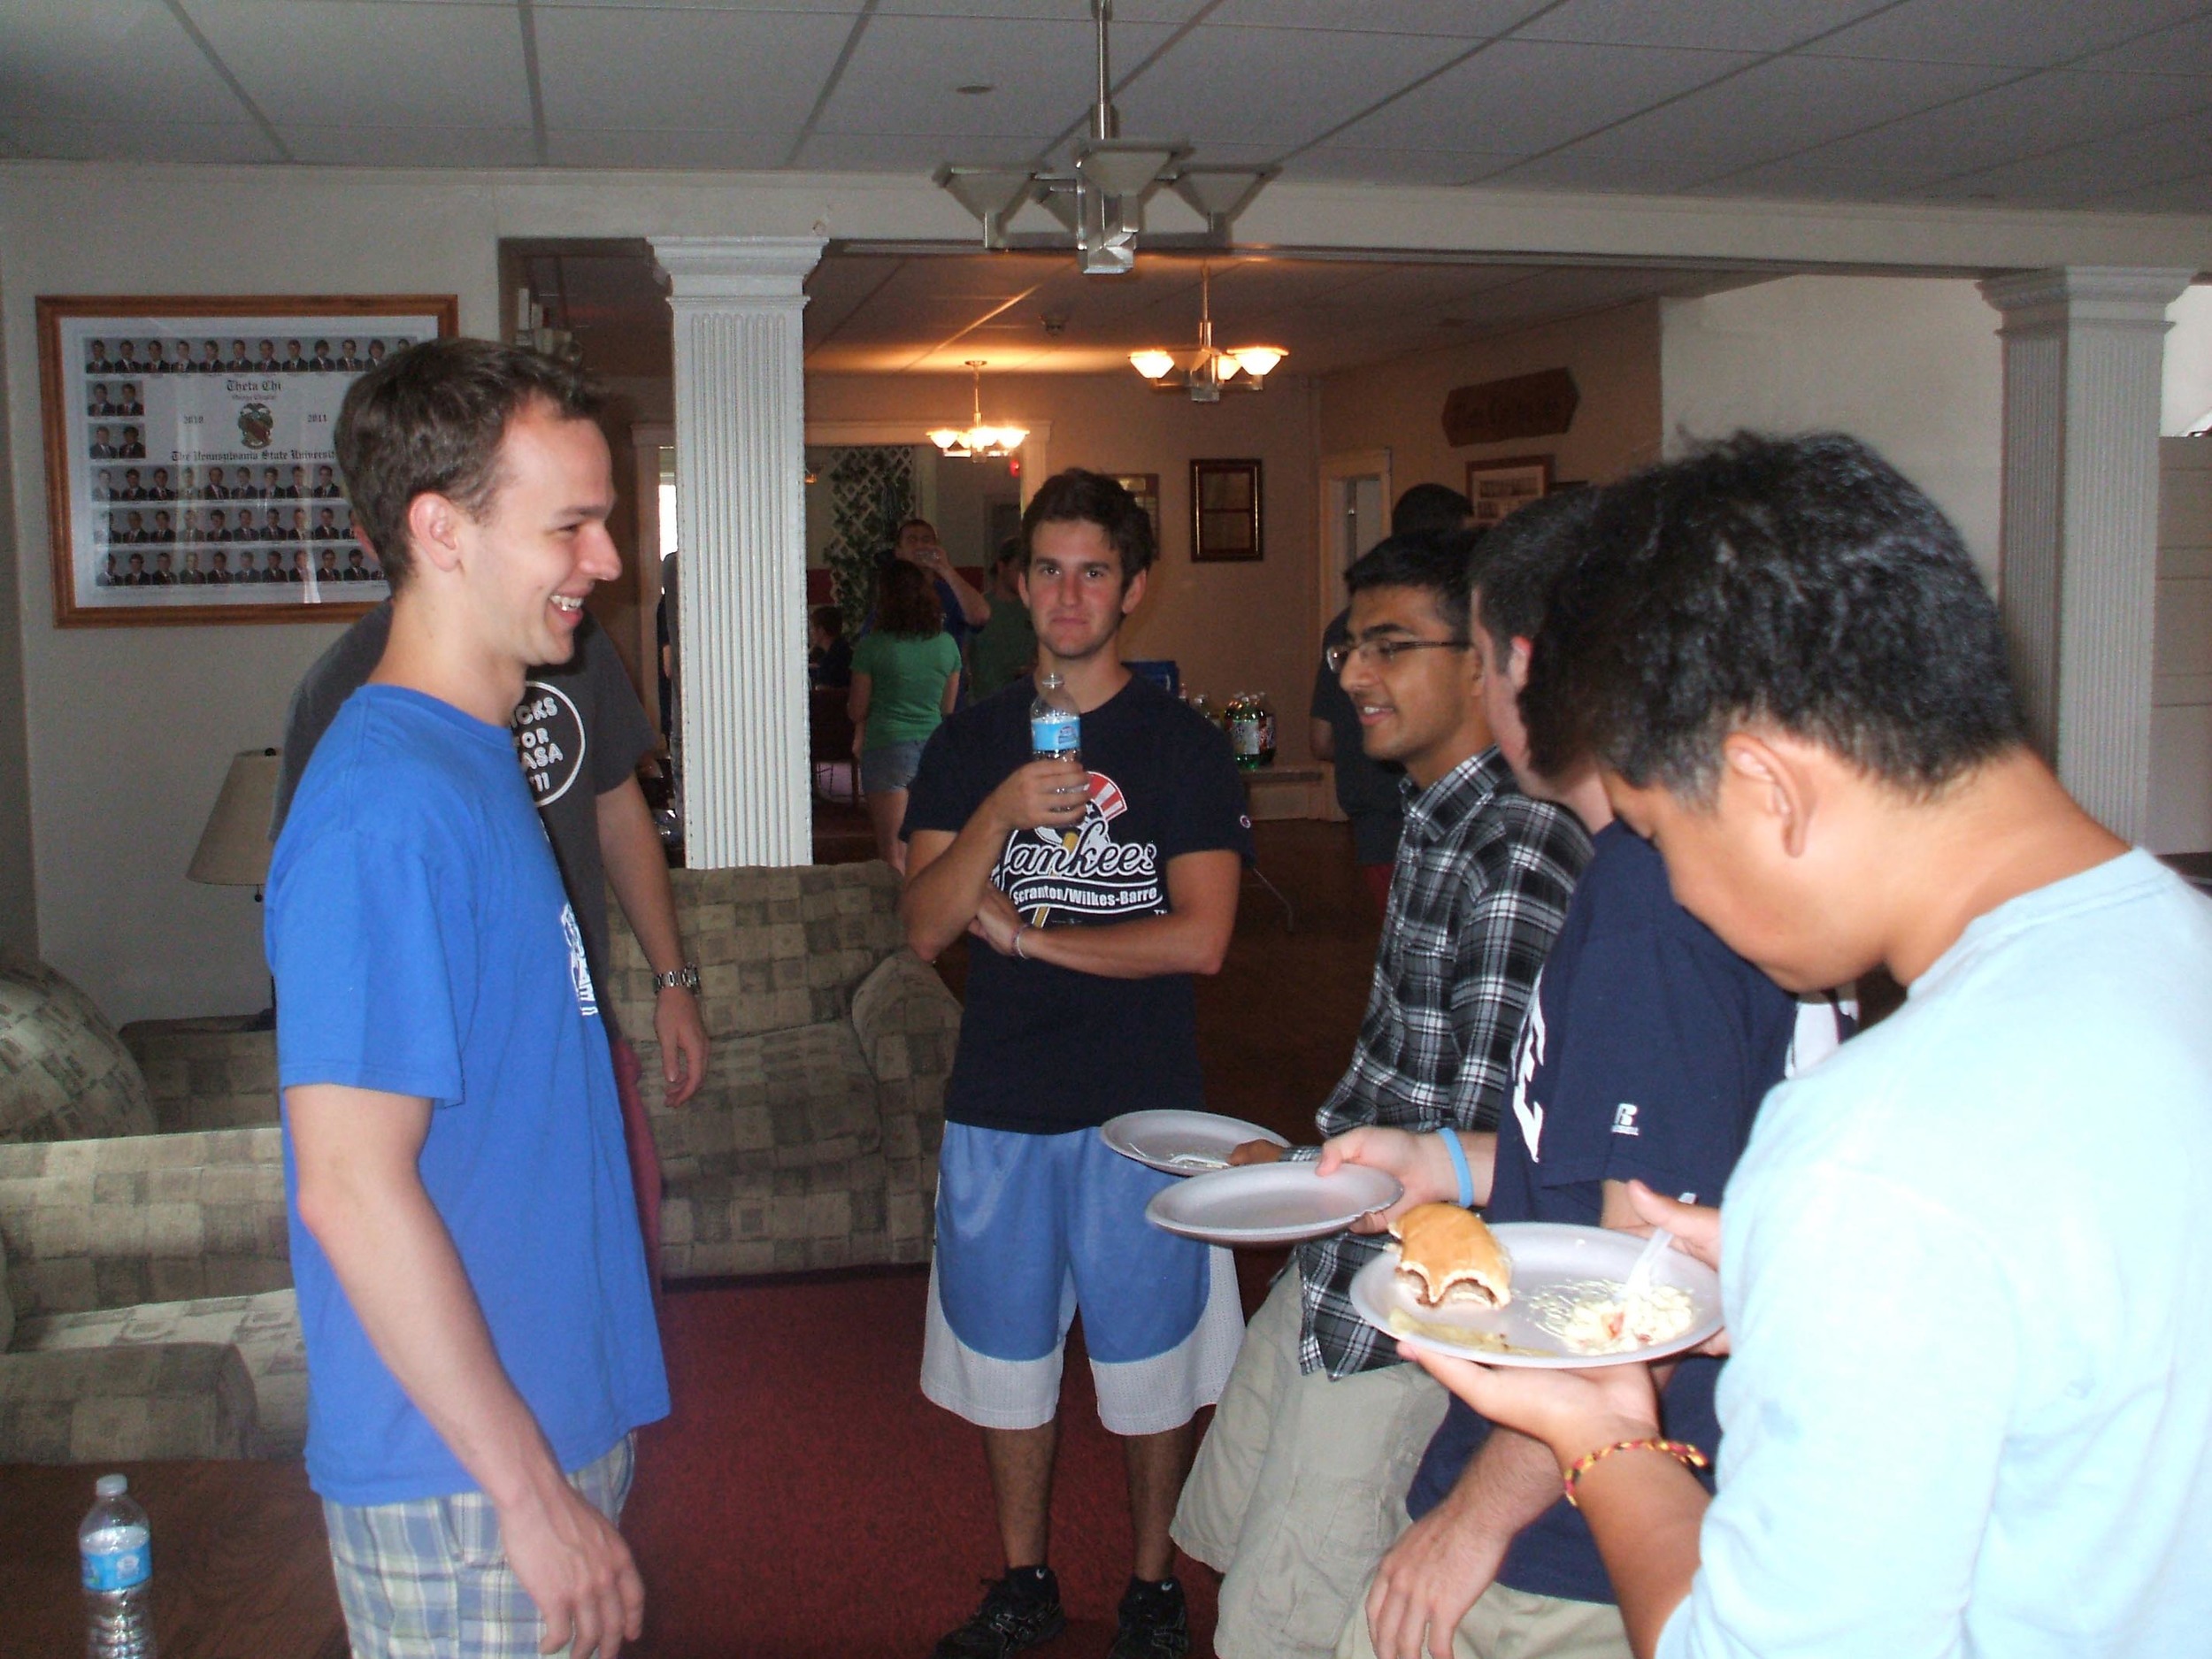  L to R: Grant Gaston and Nick Lello with several rushees 
Labor Day Picnic - September 3, 2012 